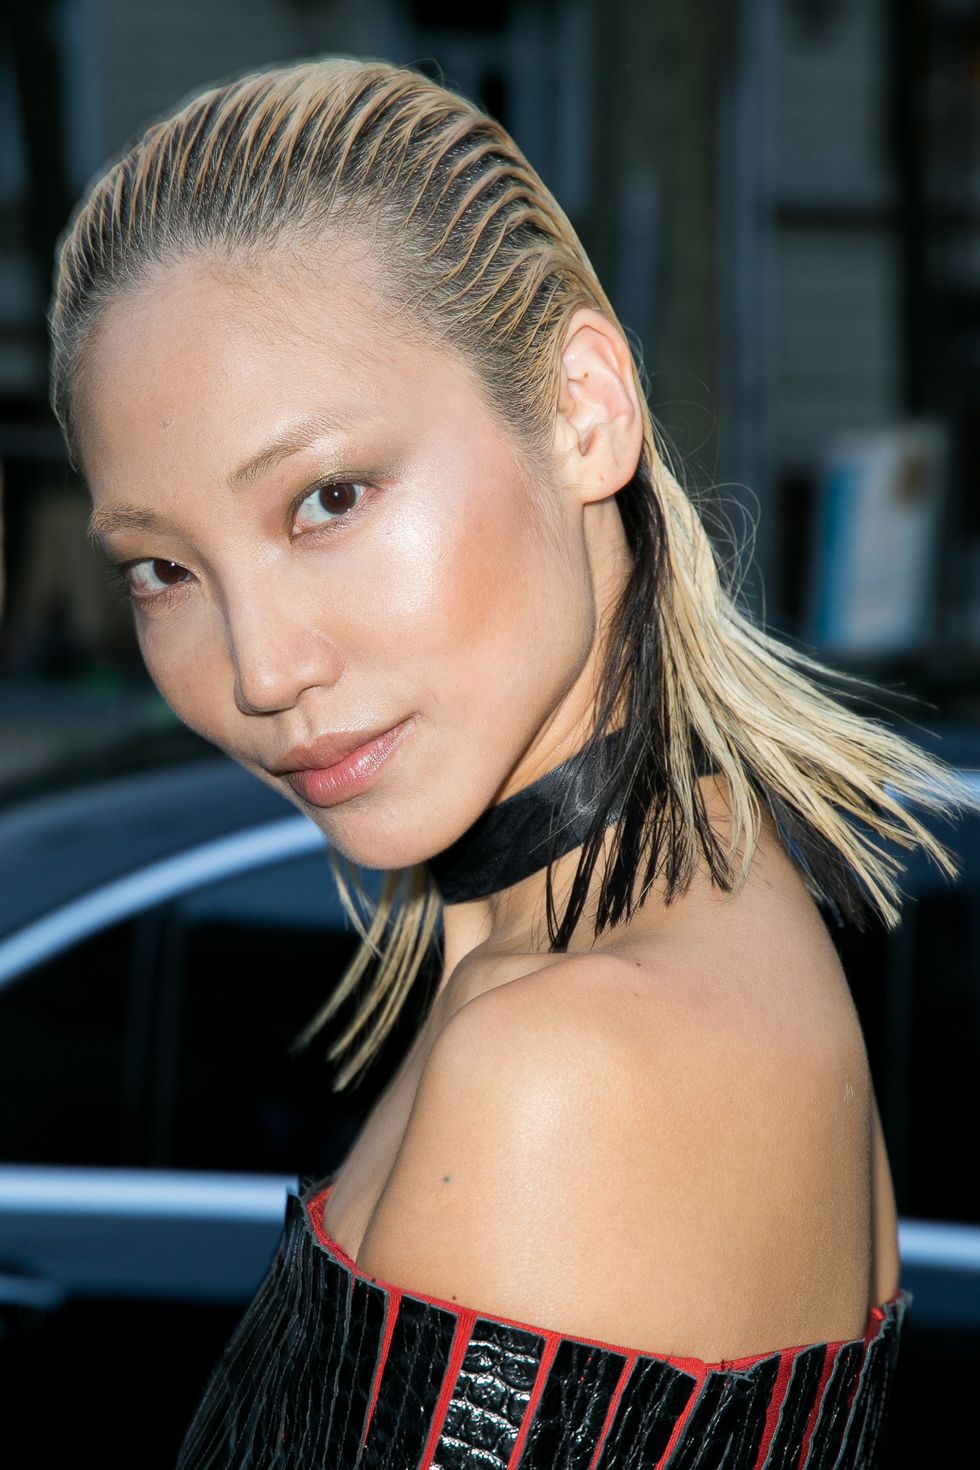 <p>Model Soo Joo Park marries two of-the-moment trends: a daring dye job and slicked back strands.</p>